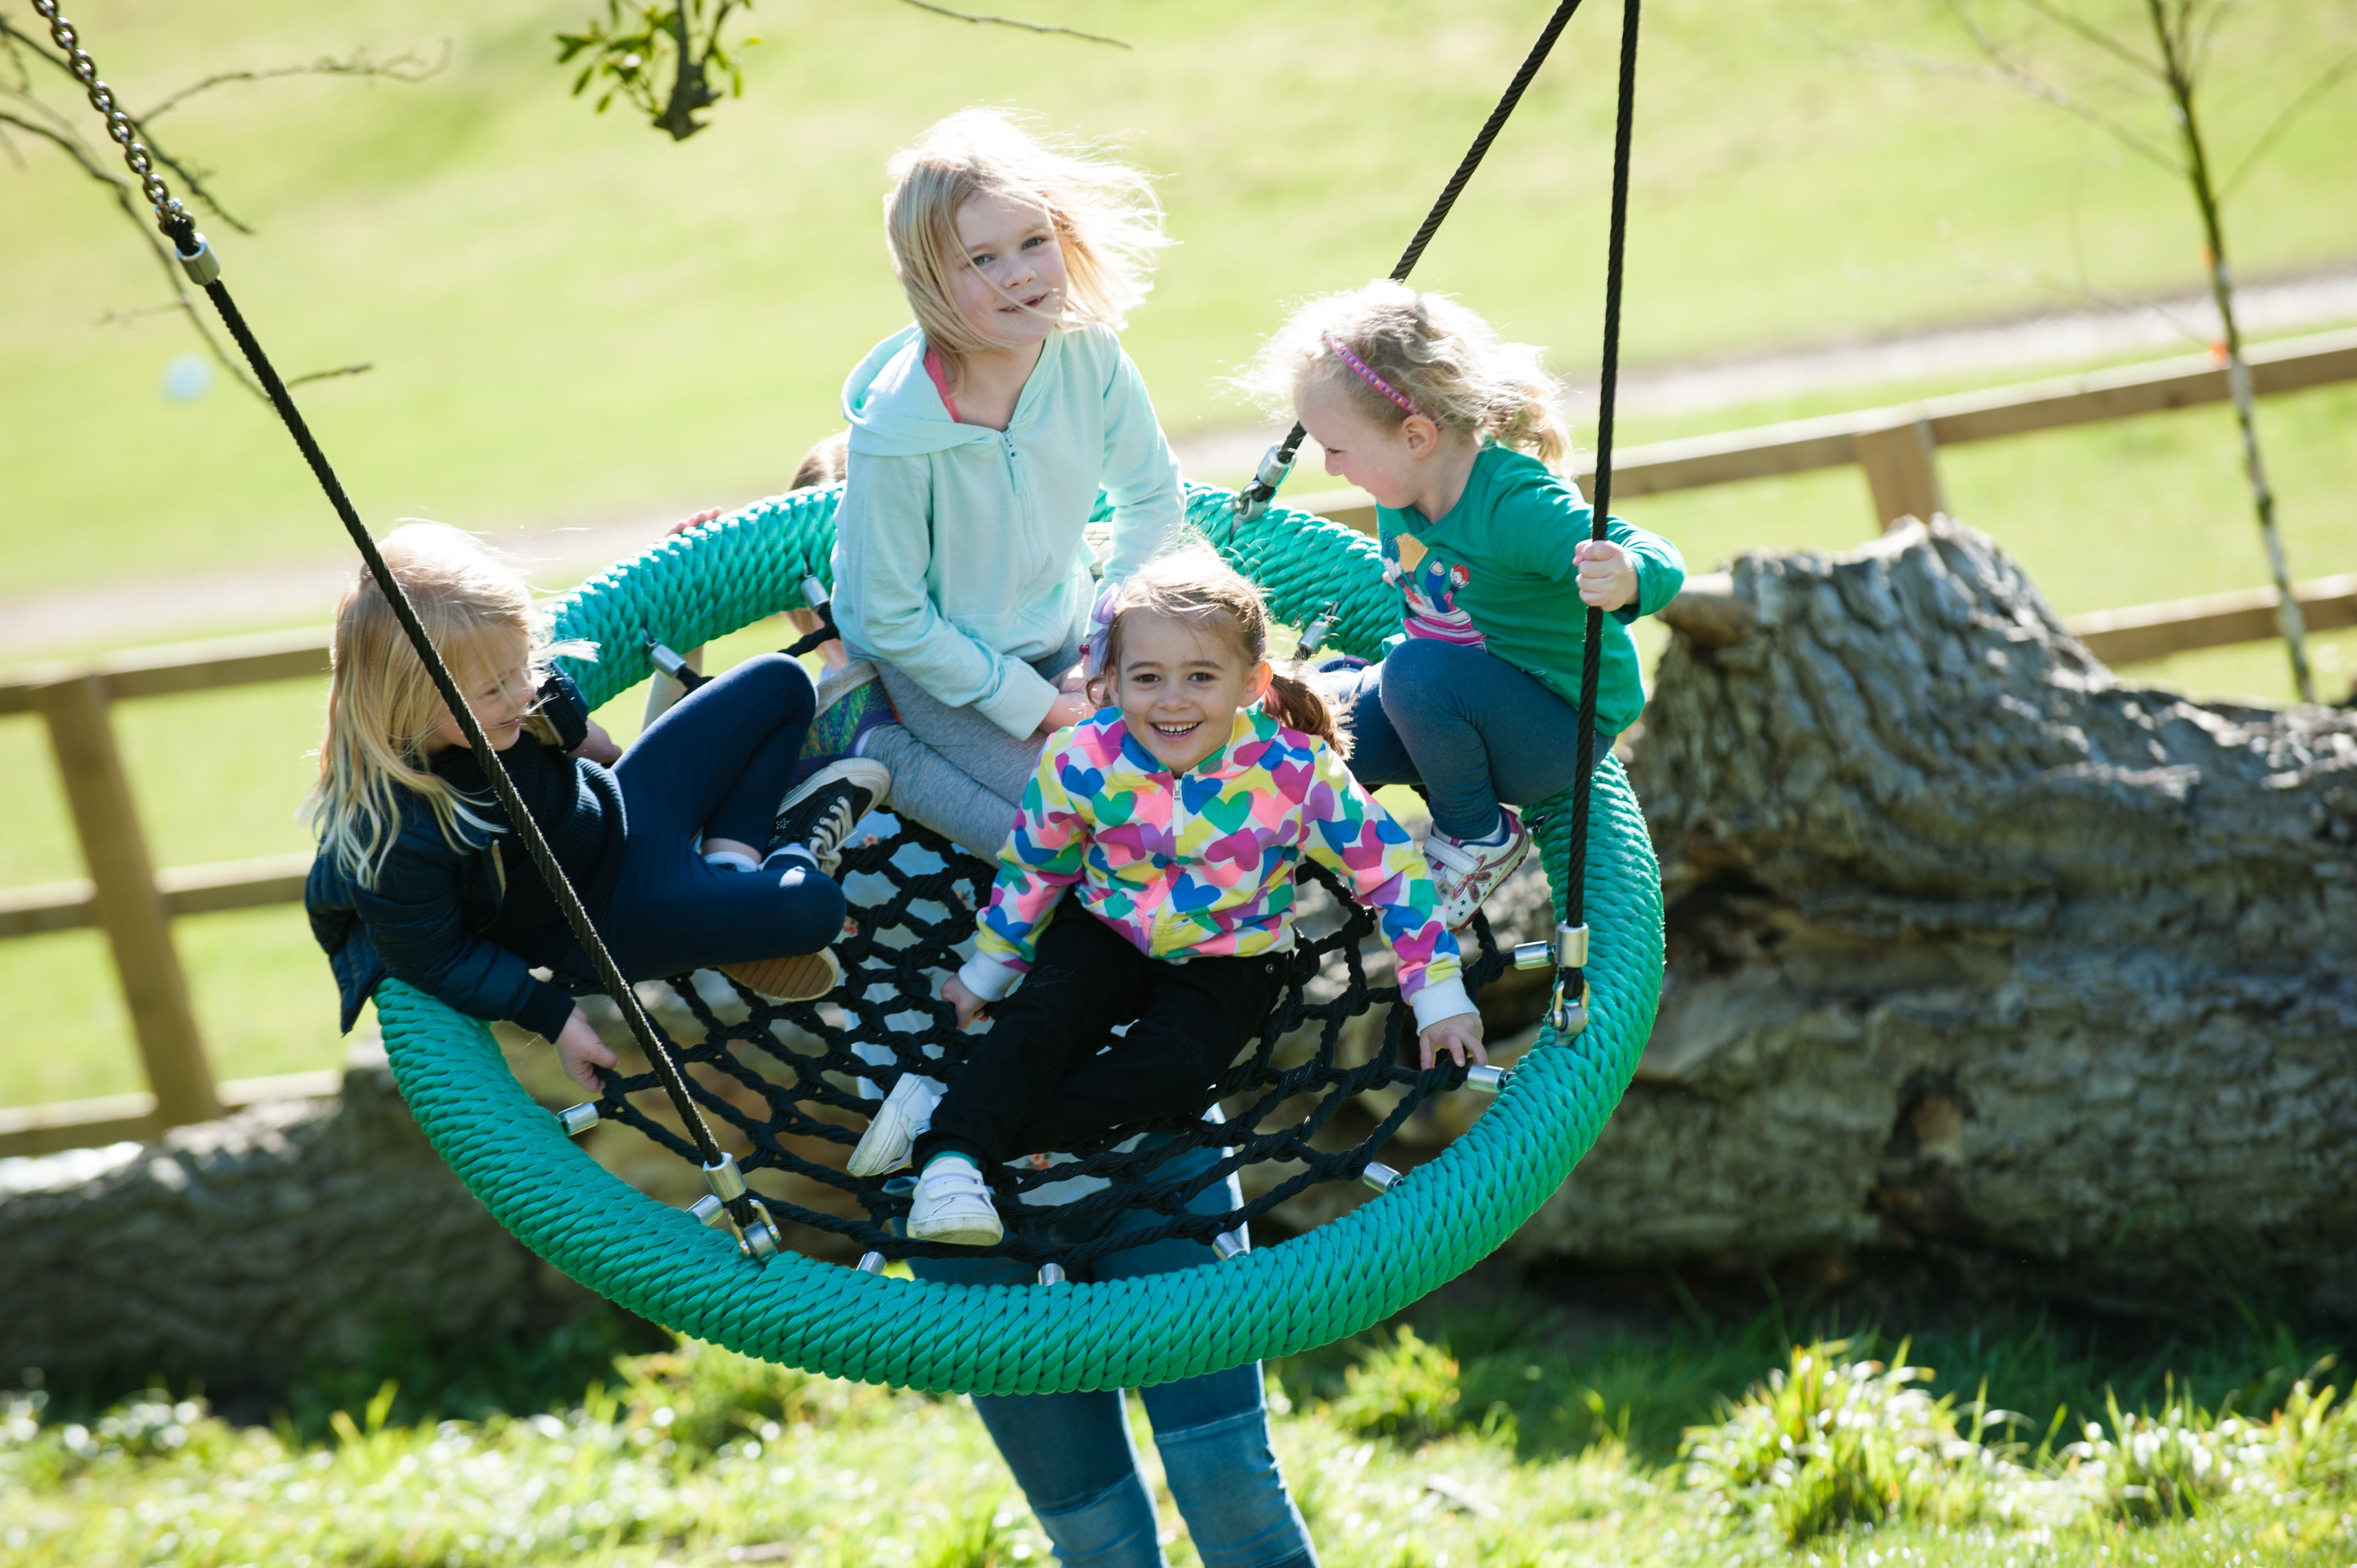 Cradle Nest Swing a playground classic with a basket swing seat